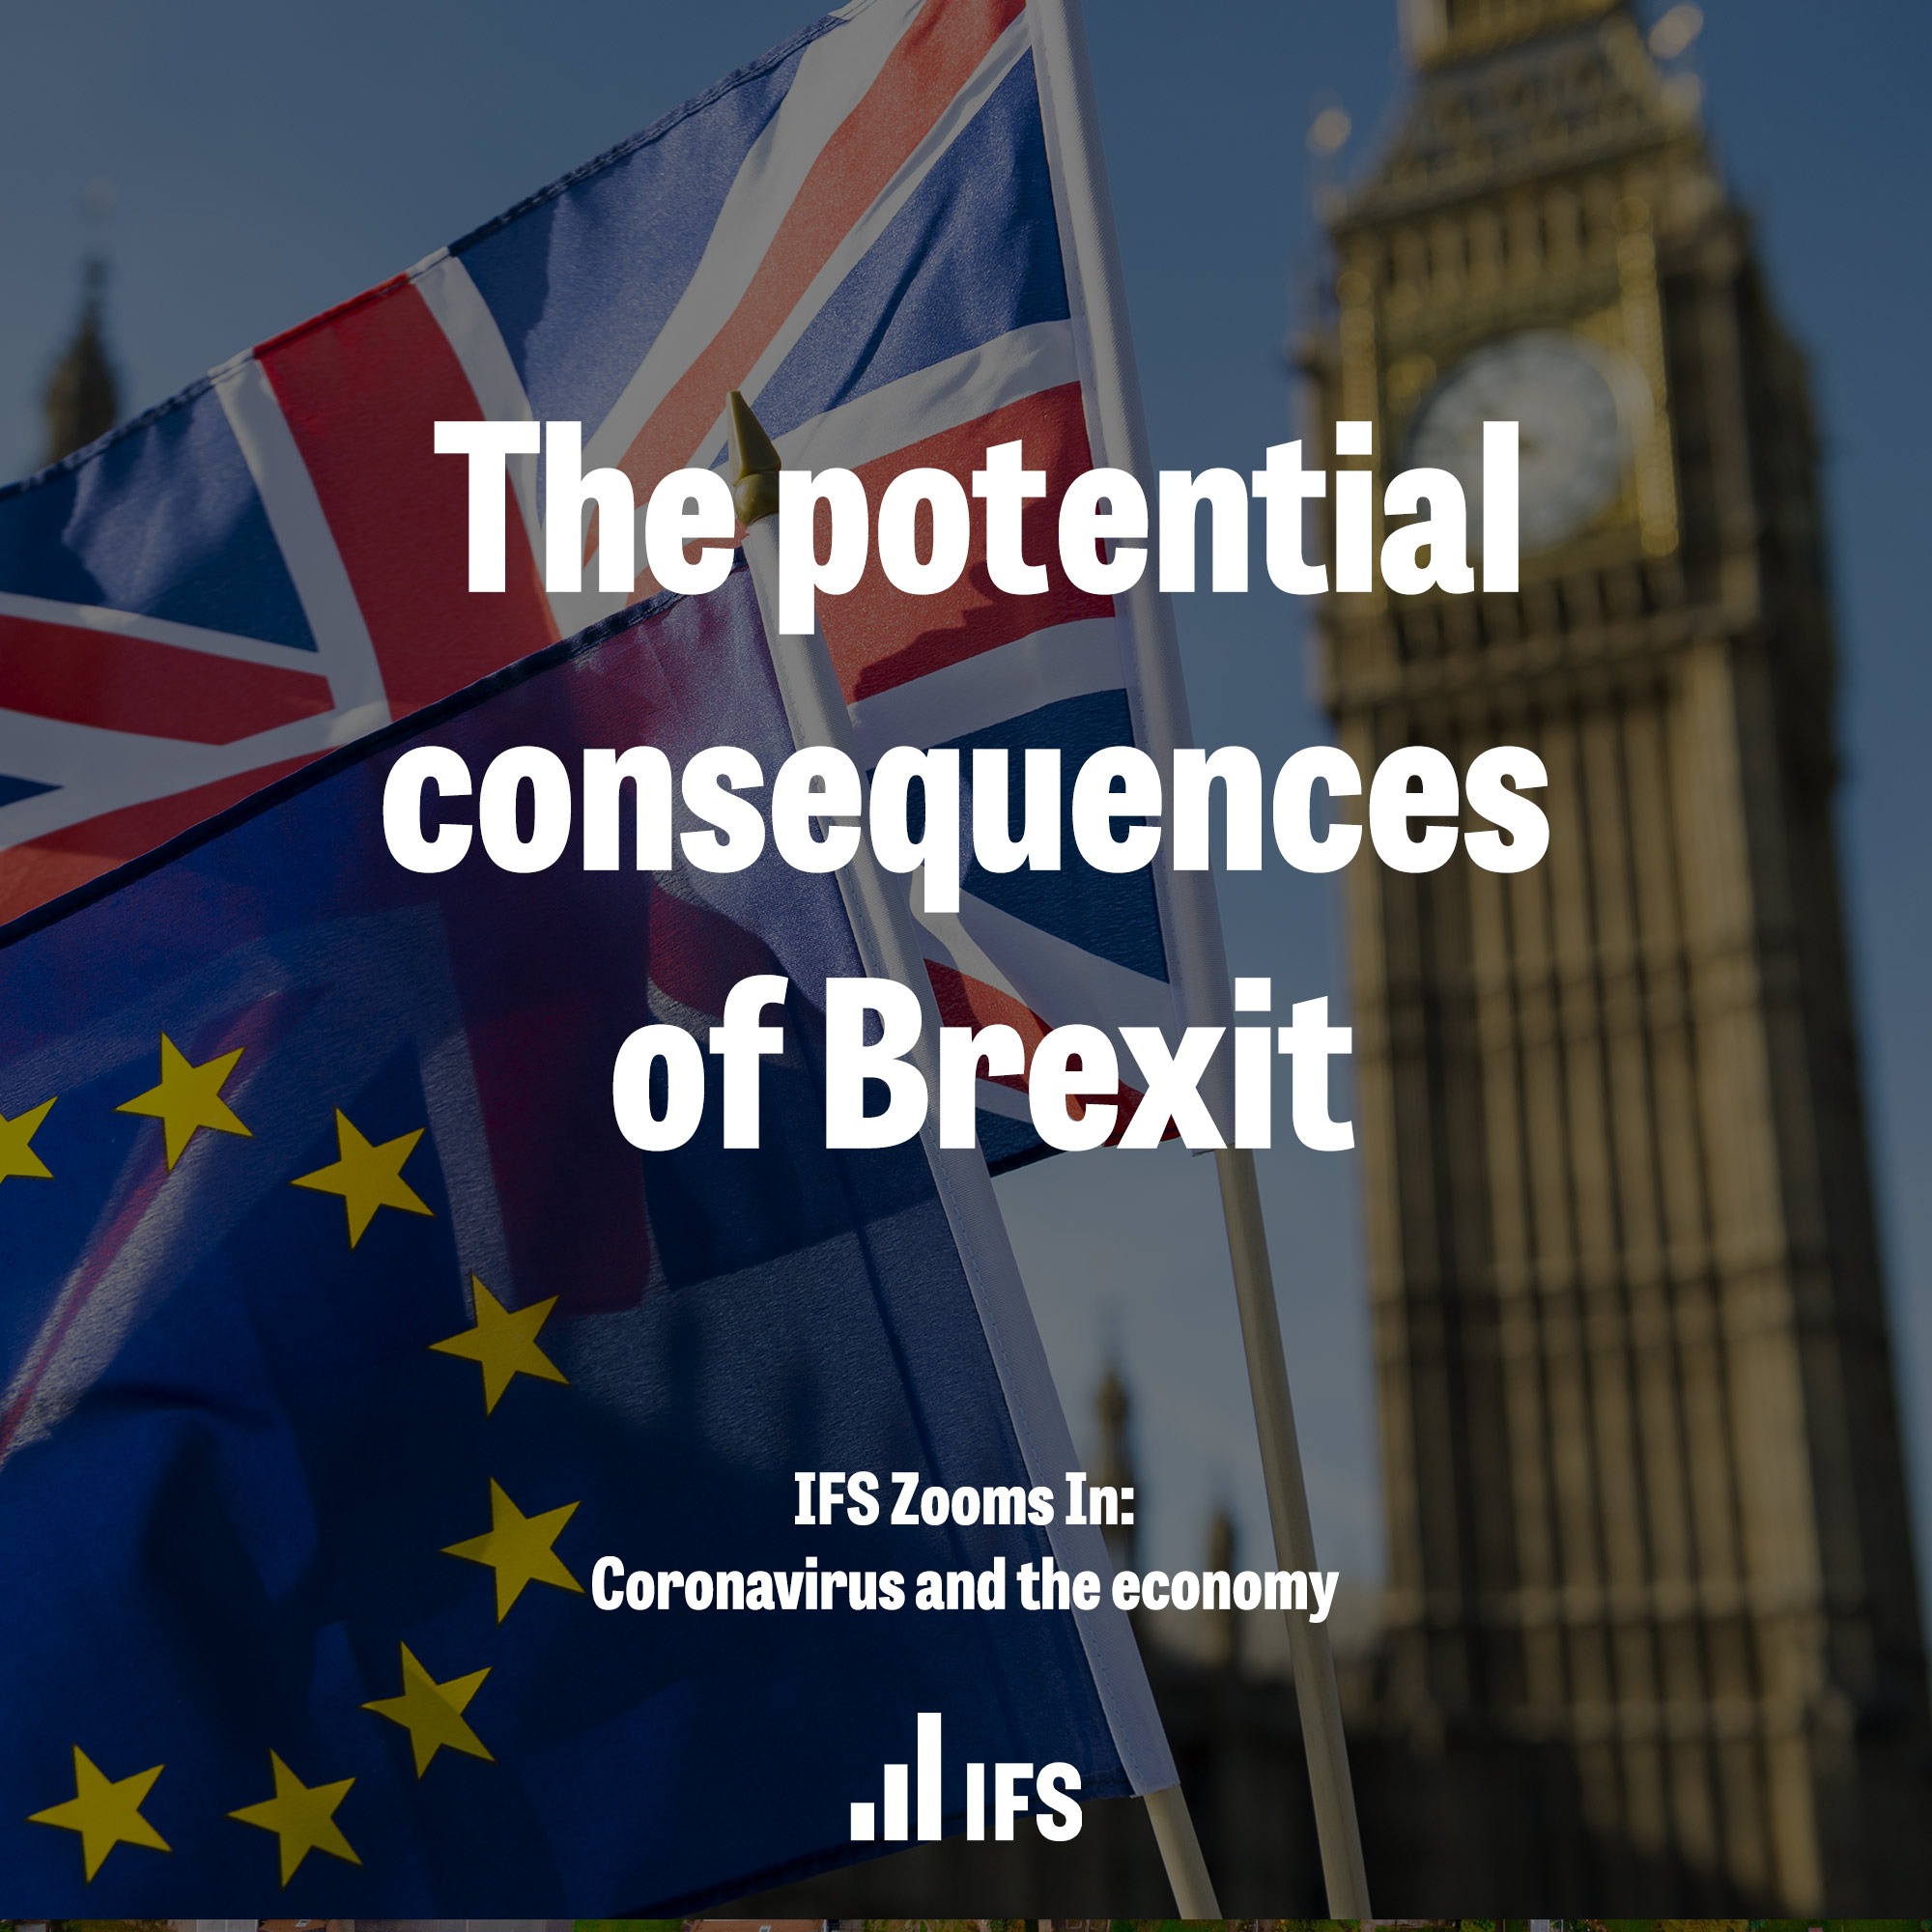 The potential consequences of Brexit